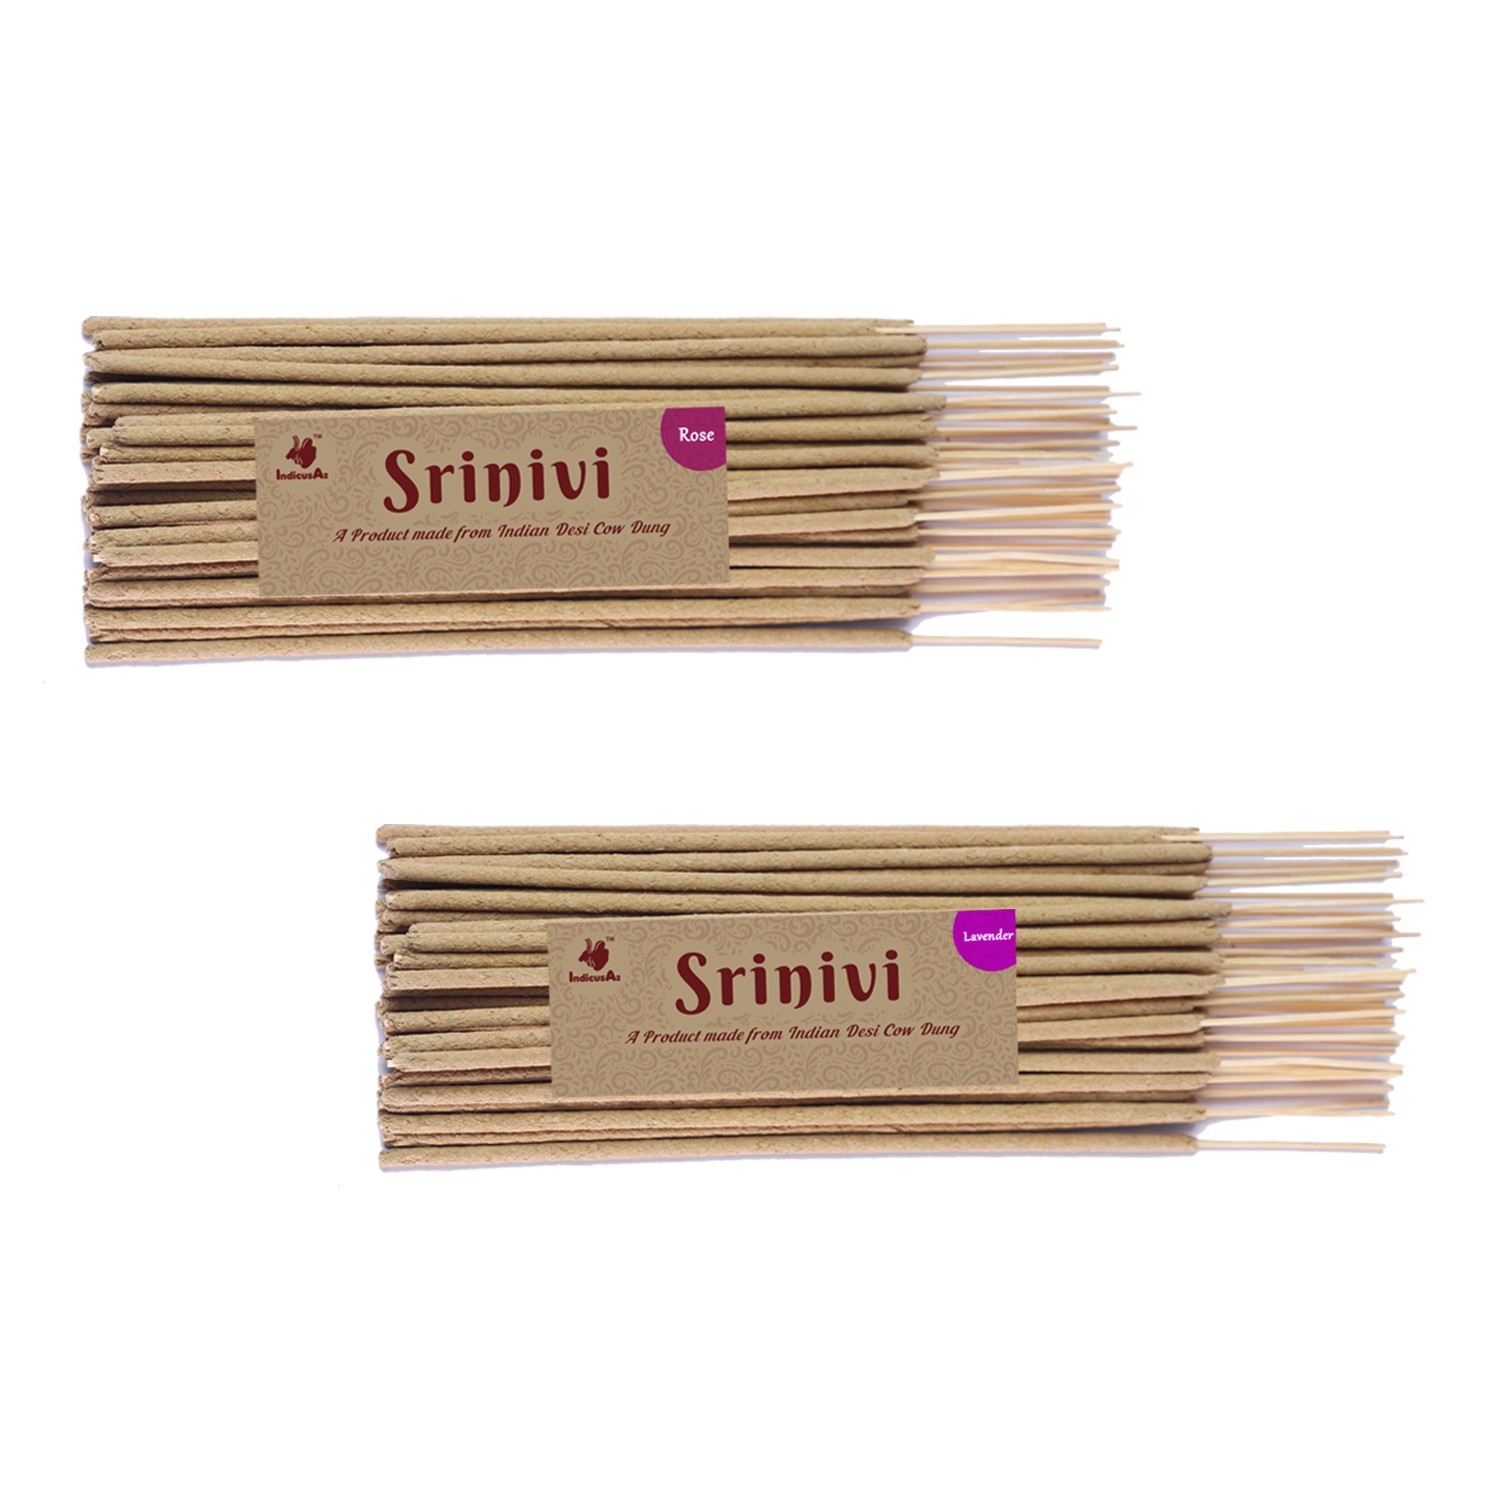 Srinivi Agarbattis - Made up of desi cow dung|Pack of 2|Each pack consists of 35 sticks|Fragrance – Rose, Lavender.